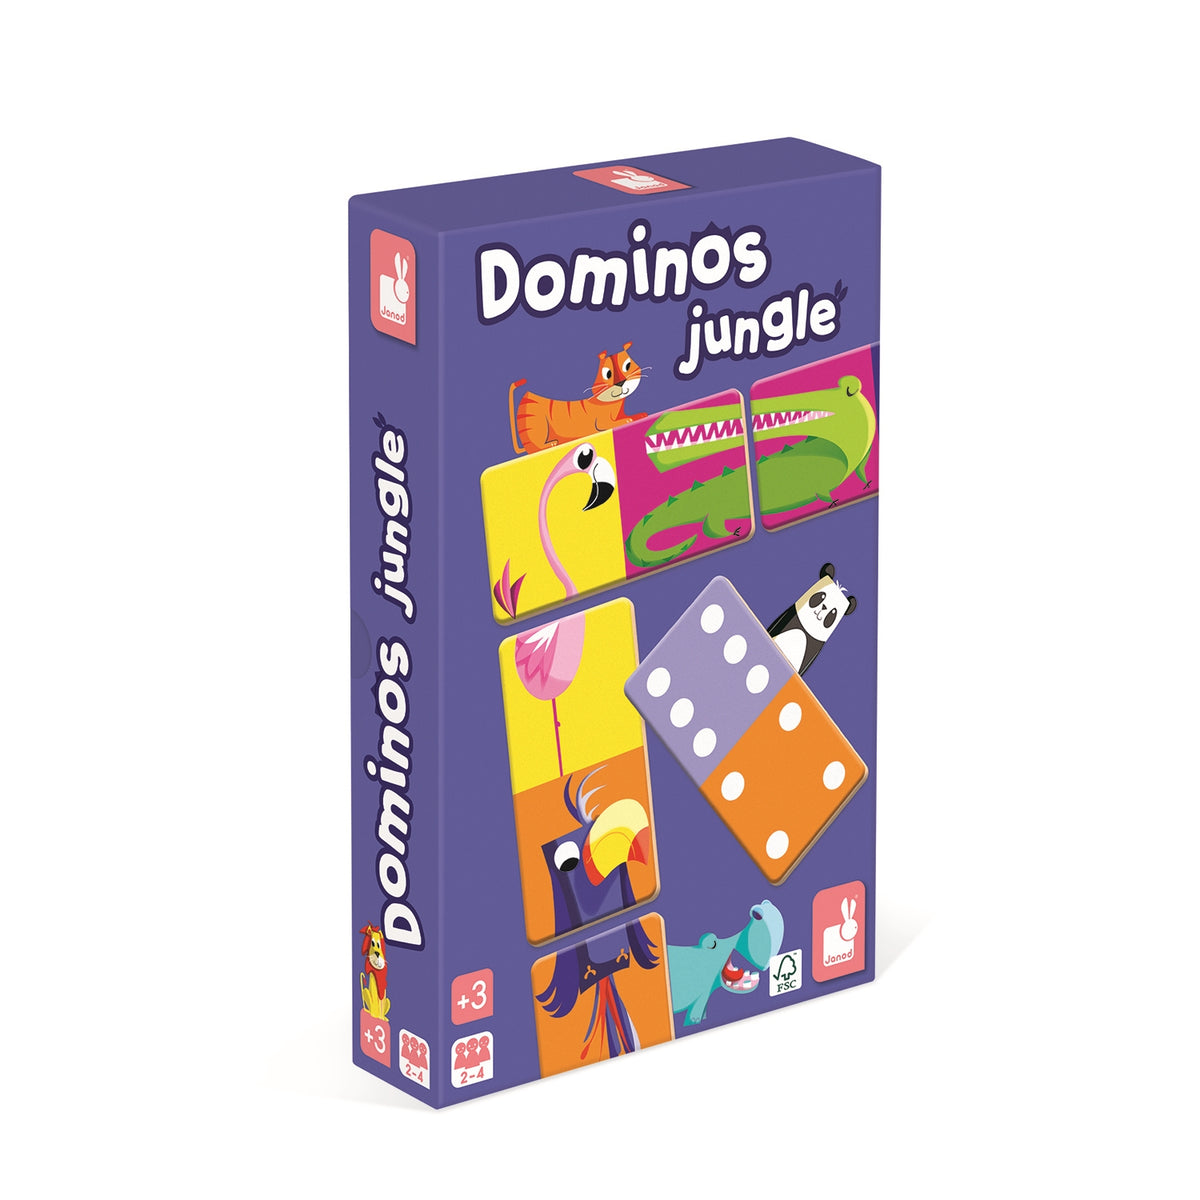 Dominos Jungle Game by Janod